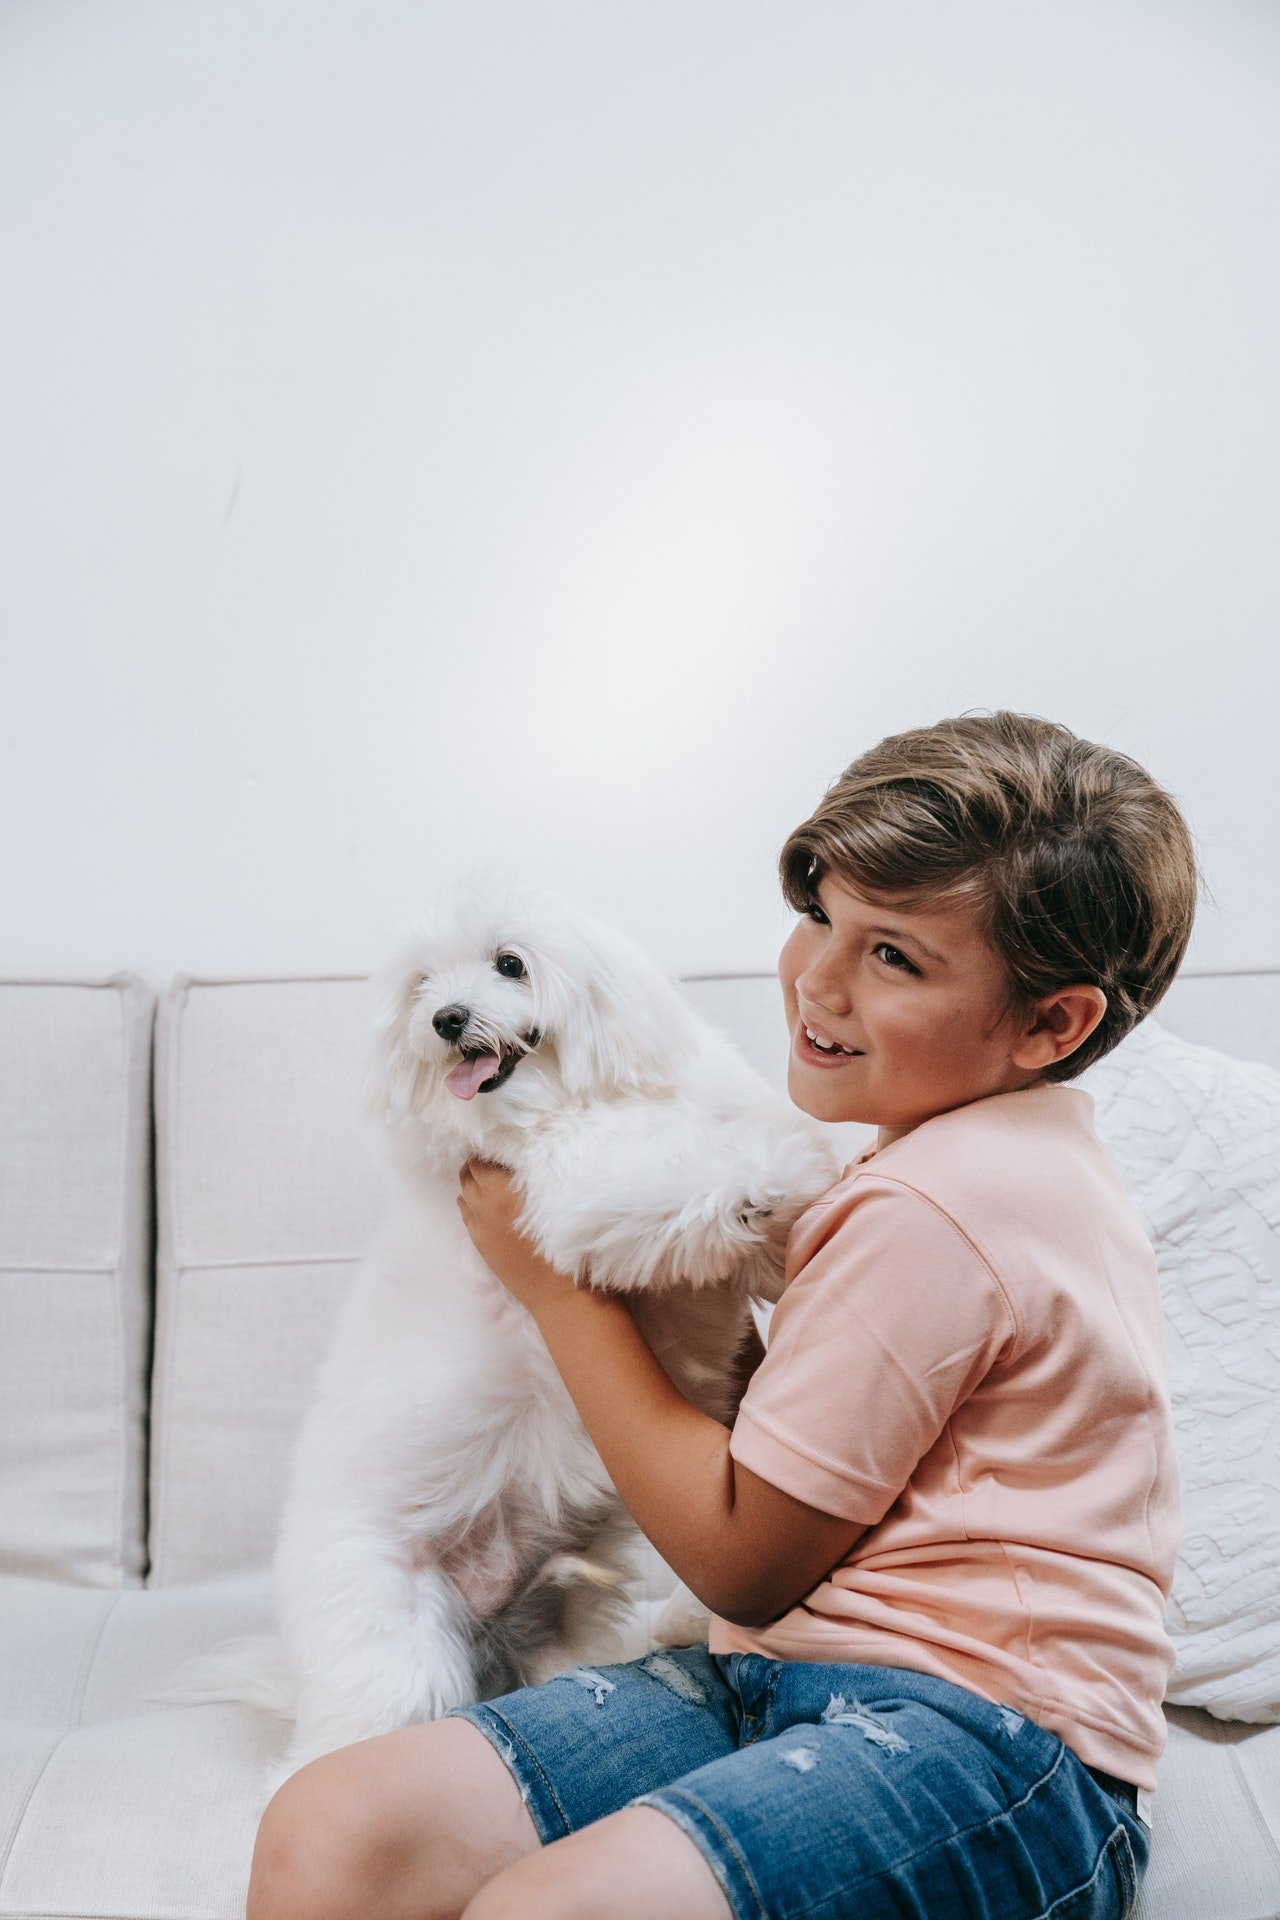 Boy sitting with a dog | Source: Pexels